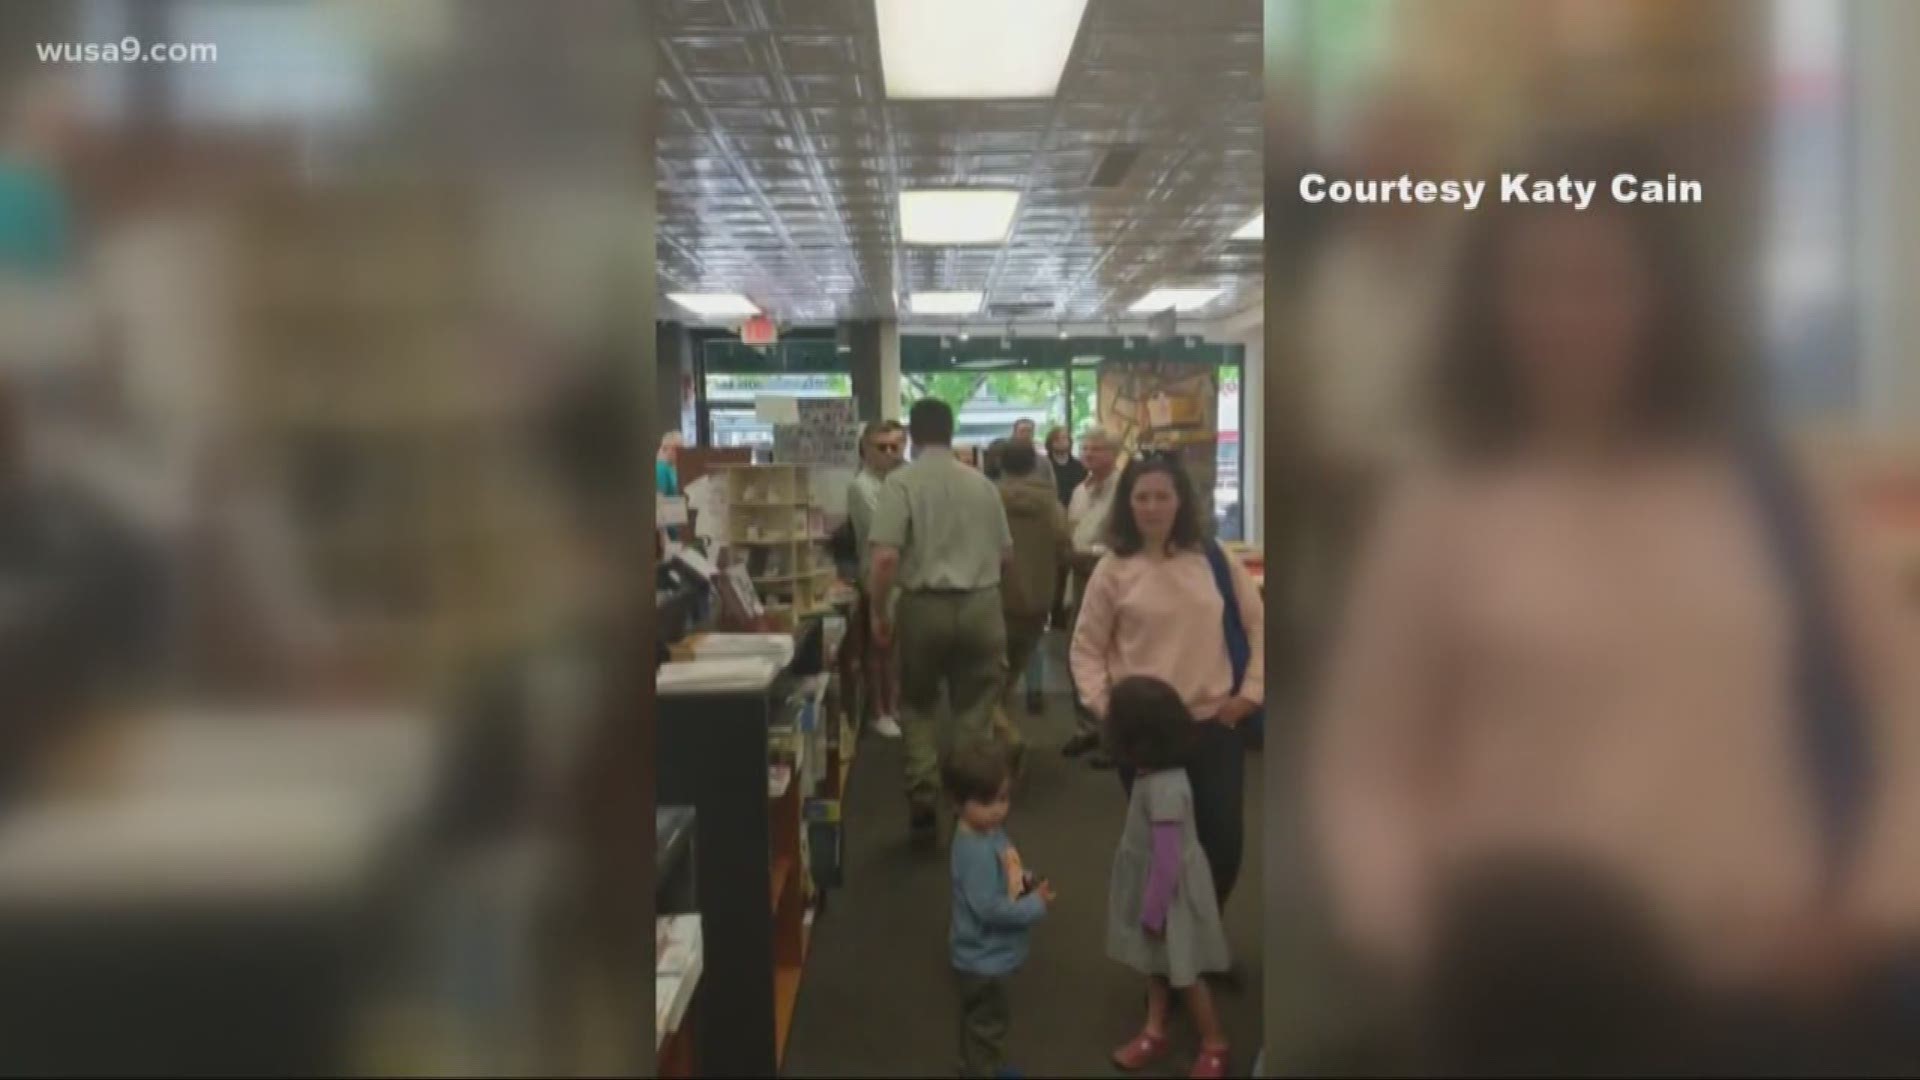 Protestors shouting white power messages disrupt a book talk in a northwest Washington book store. It happened Saturday afternoon at the Politics and Prose bookstore on Connecticut Avenue. The incident was captured on cell phone video.